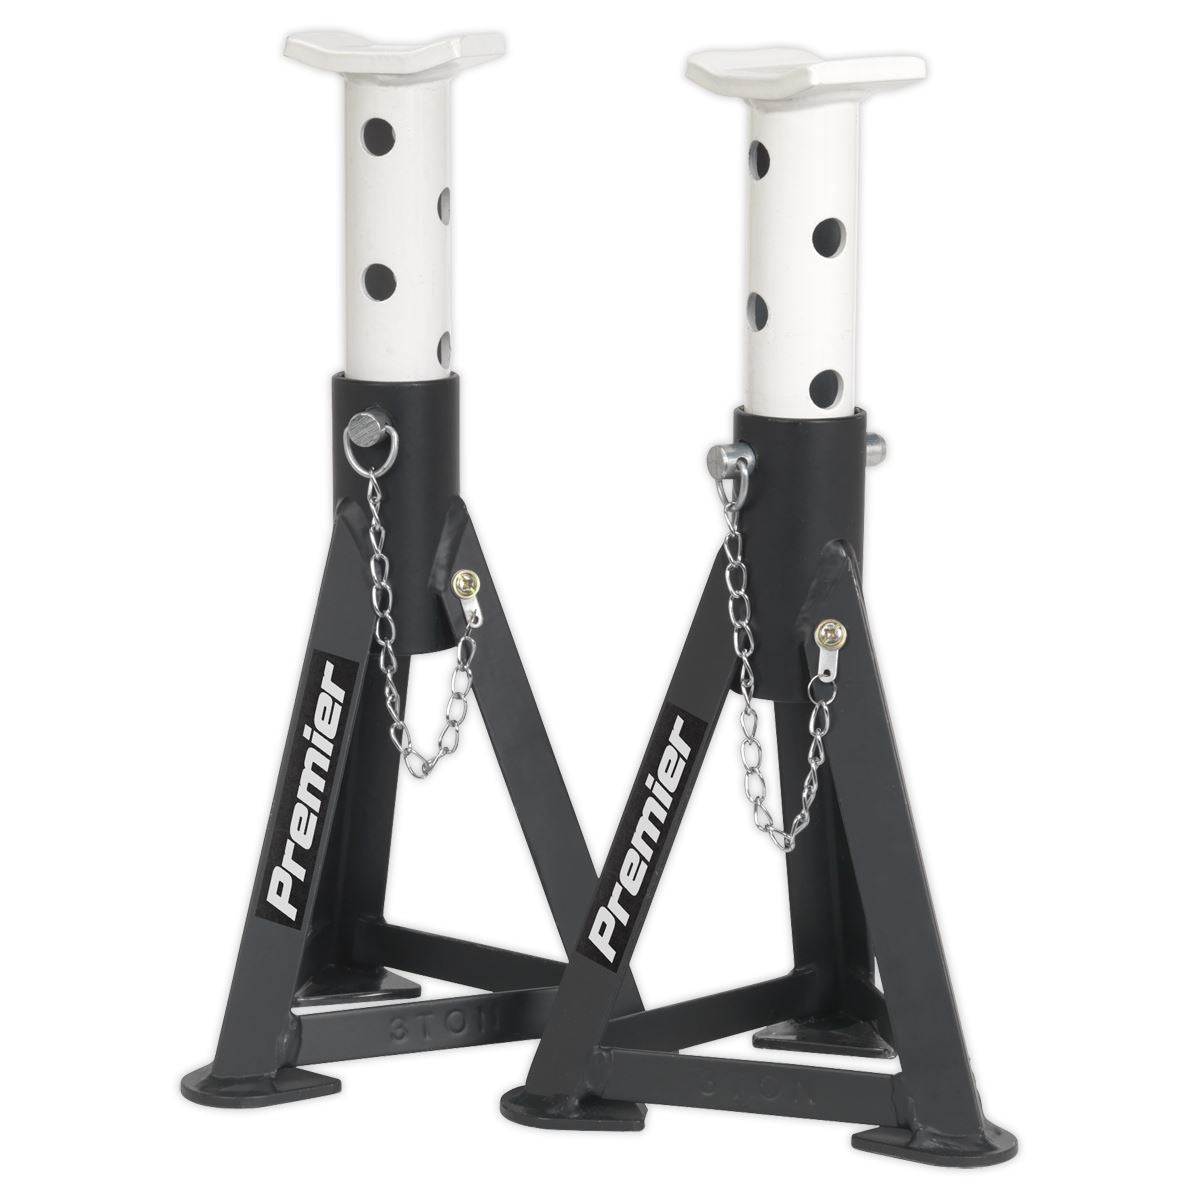 Sealey Premier Axle Stands (Pair) 3 Tonne Capacity per Stand - White